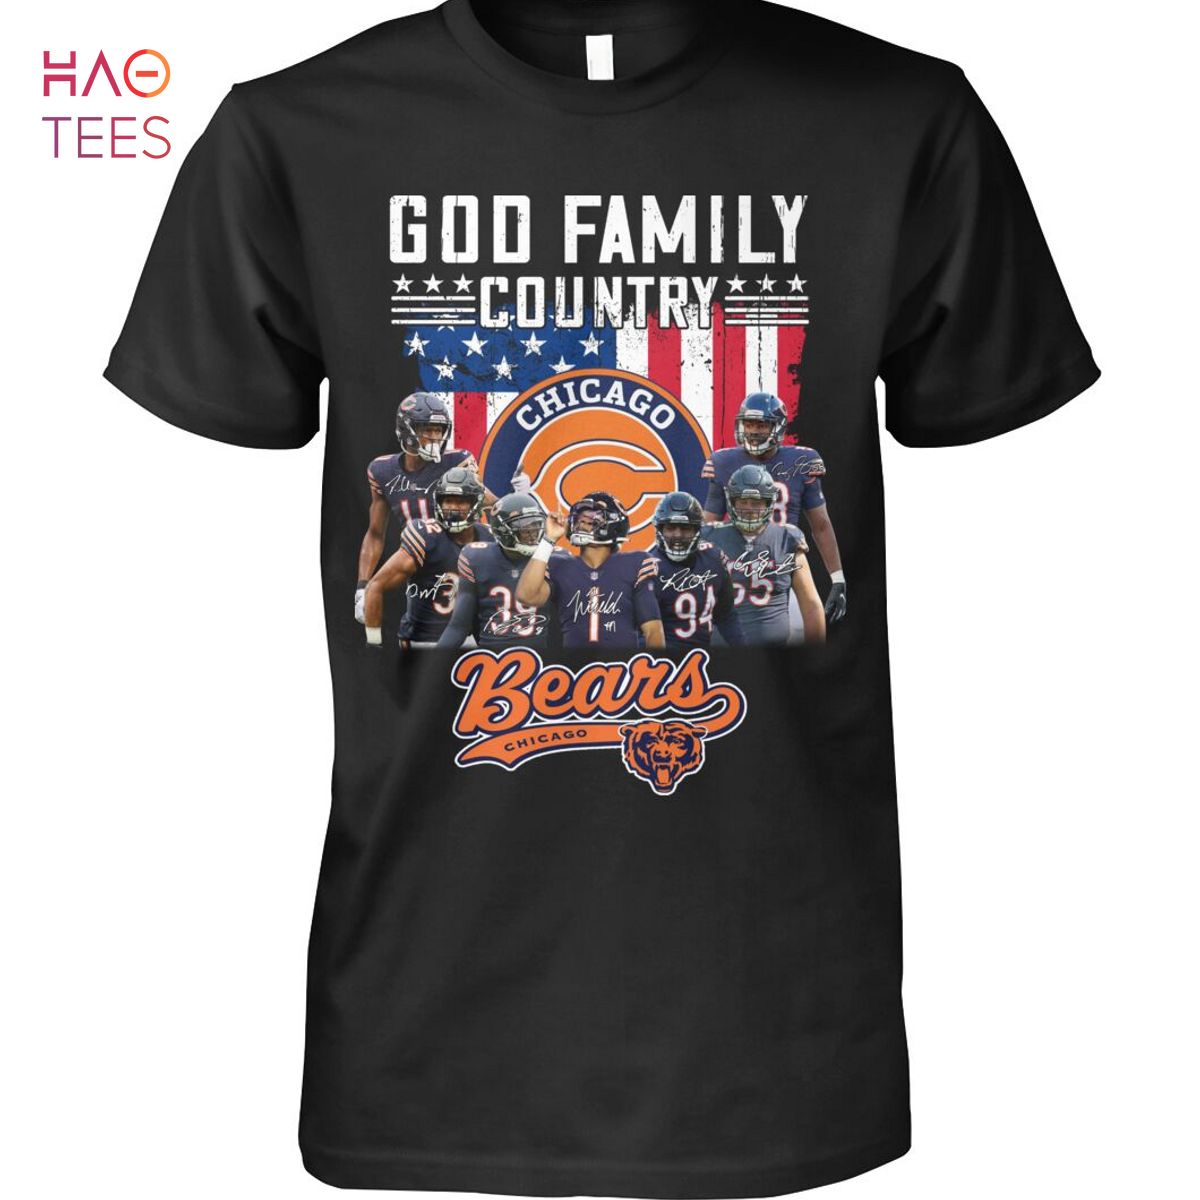 God Family Country Chicago Bears Shirt